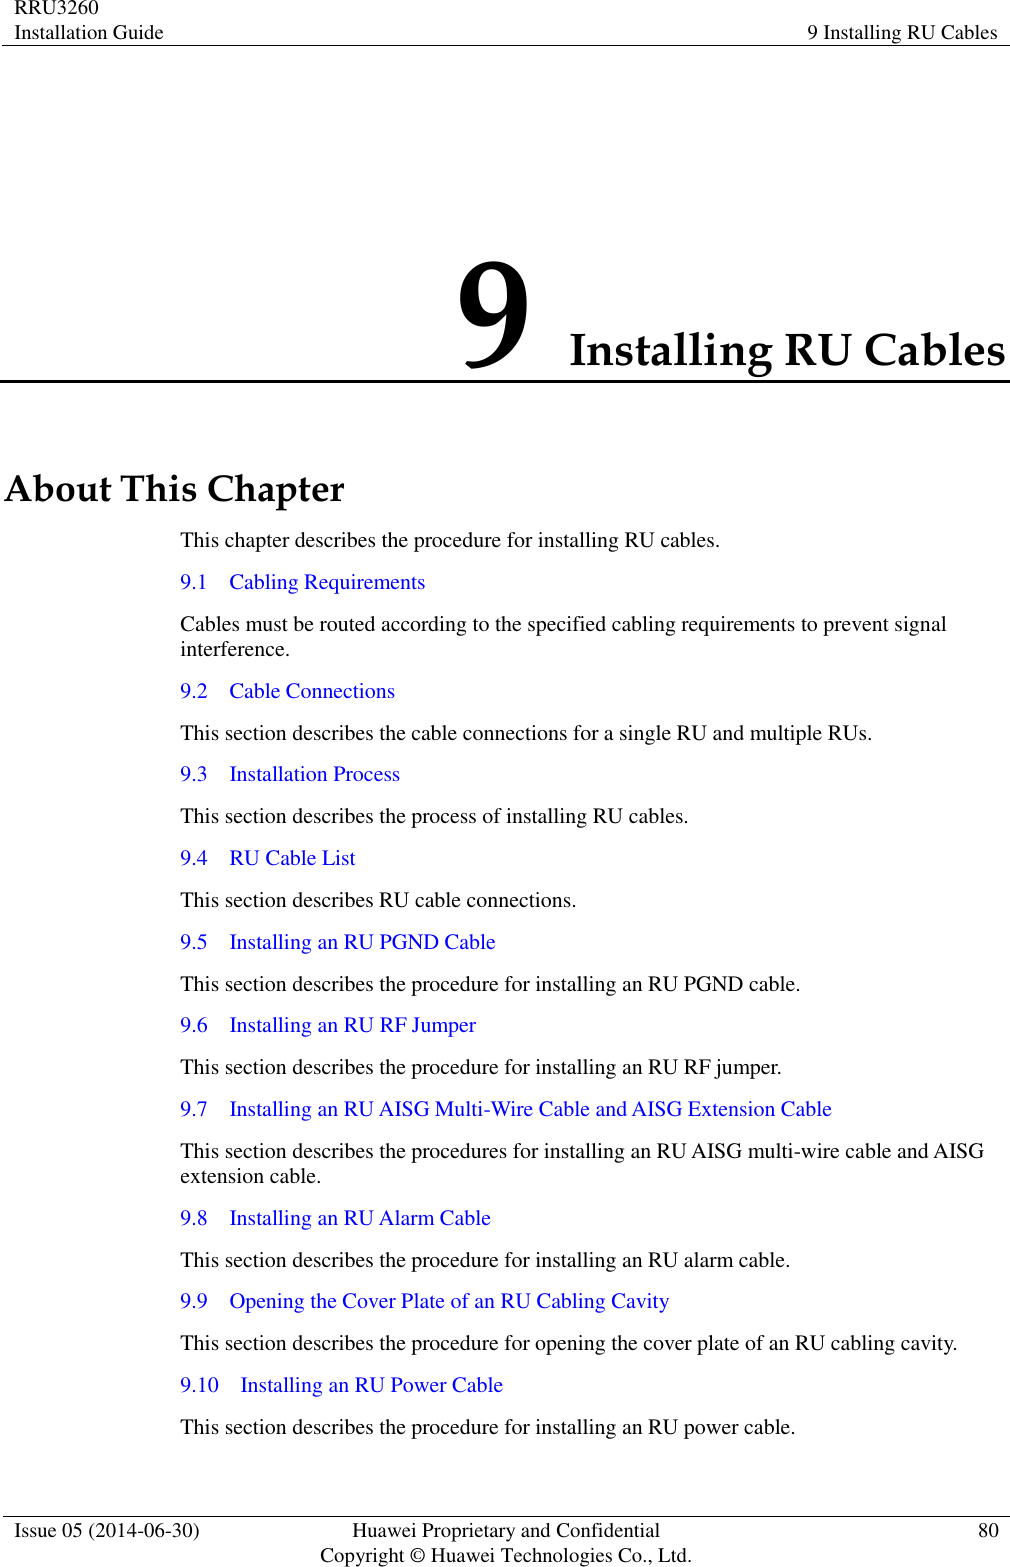 RRU3260 Installation Guide 9 Installing RU Cables  Issue 05 (2014-06-30) Huawei Proprietary and Confidential                                     Copyright © Huawei Technologies Co., Ltd. 80  9 Installing RU Cables About This Chapter This chapter describes the procedure for installing RU cables.   9.1    Cabling Requirements Cables must be routed according to the specified cabling requirements to prevent signal interference. 9.2    Cable Connections This section describes the cable connections for a single RU and multiple RUs. 9.3    Installation Process This section describes the process of installing RU cables. 9.4    RU Cable List This section describes RU cable connections. 9.5    Installing an RU PGND Cable This section describes the procedure for installing an RU PGND cable. 9.6    Installing an RU RF Jumper This section describes the procedure for installing an RU RF jumper. 9.7    Installing an RU AISG Multi-Wire Cable and AISG Extension Cable This section describes the procedures for installing an RU AISG multi-wire cable and AISG extension cable. 9.8    Installing an RU Alarm Cable This section describes the procedure for installing an RU alarm cable. 9.9    Opening the Cover Plate of an RU Cabling Cavity This section describes the procedure for opening the cover plate of an RU cabling cavity. 9.10    Installing an RU Power Cable This section describes the procedure for installing an RU power cable. 